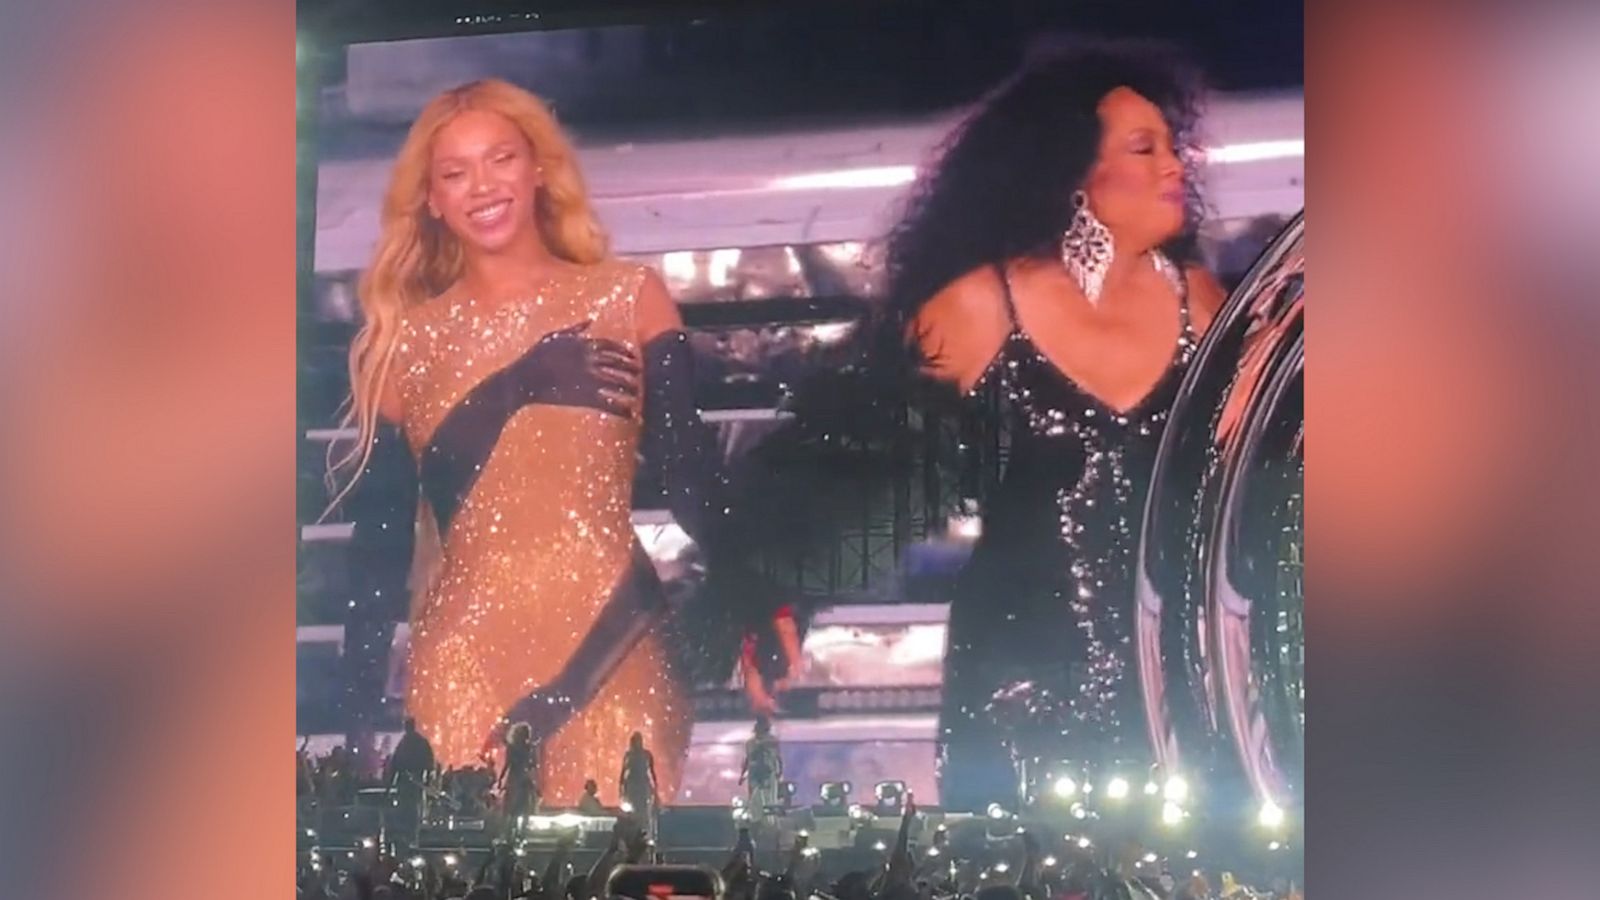 Diana Ross surprises Beyonce by singing 'Happy Birthday' during Renaissance Tour - Good Morning America